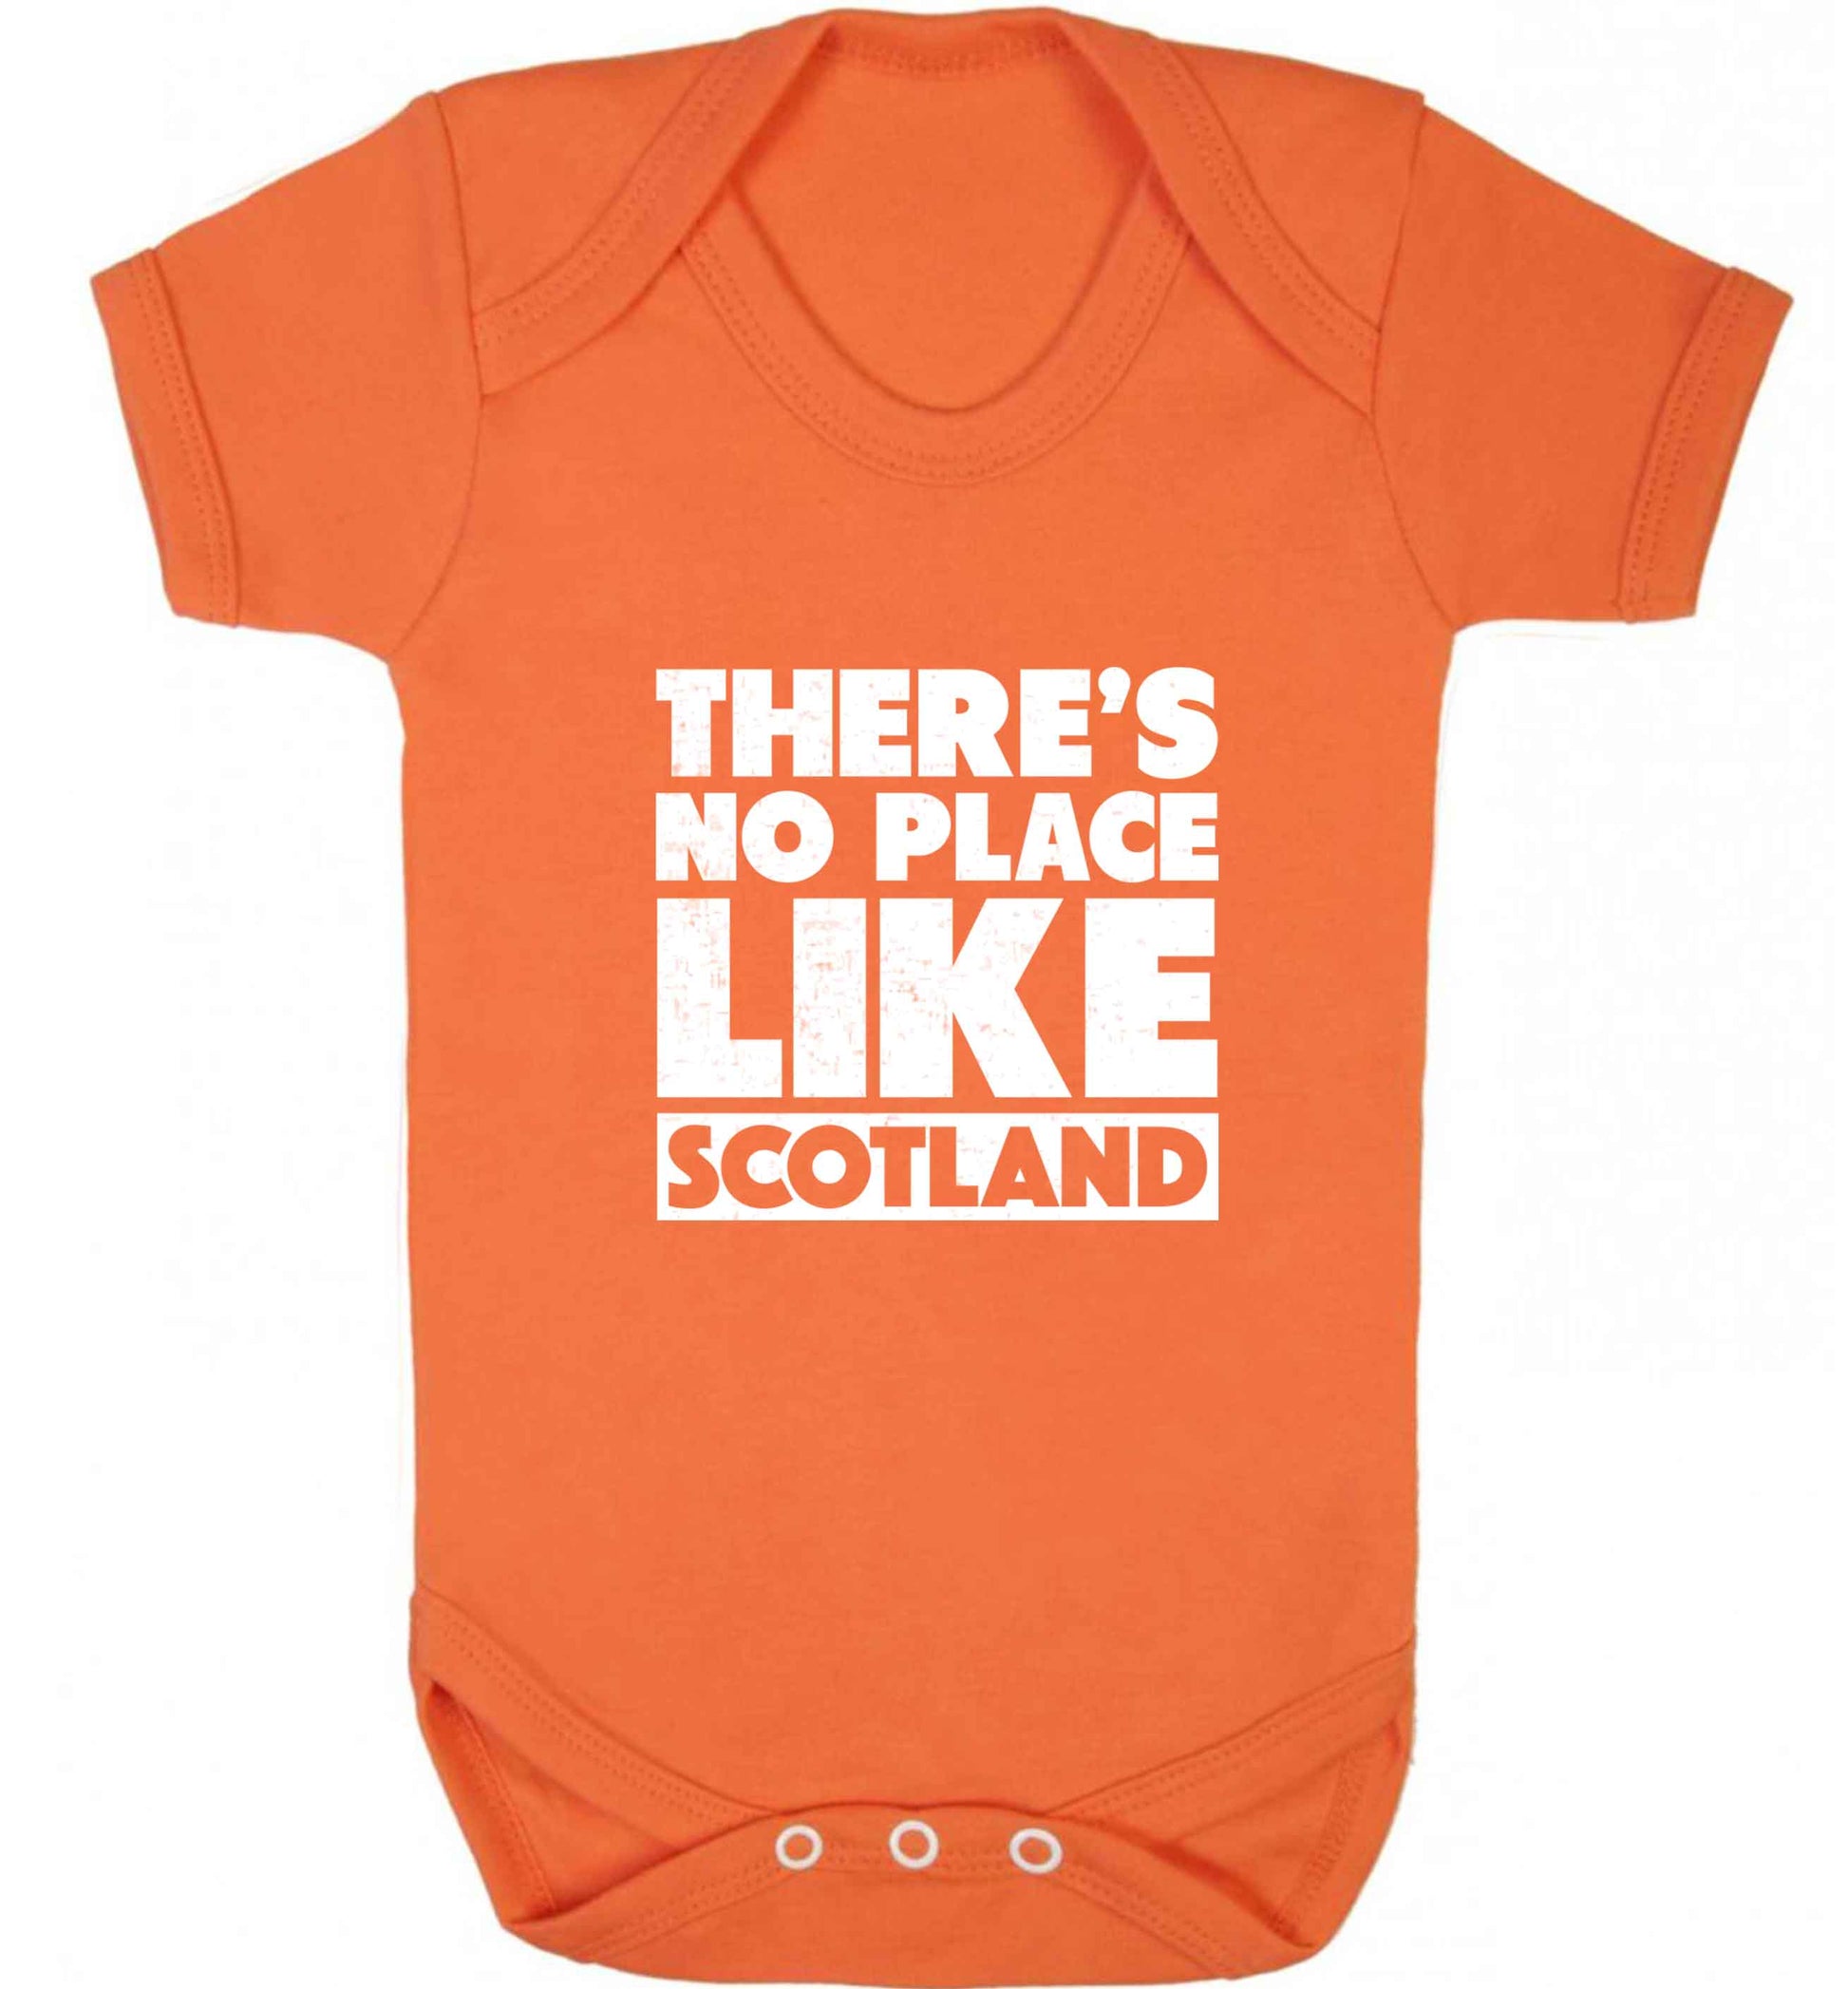 There's no place like Scotland baby vest orange 18-24 months